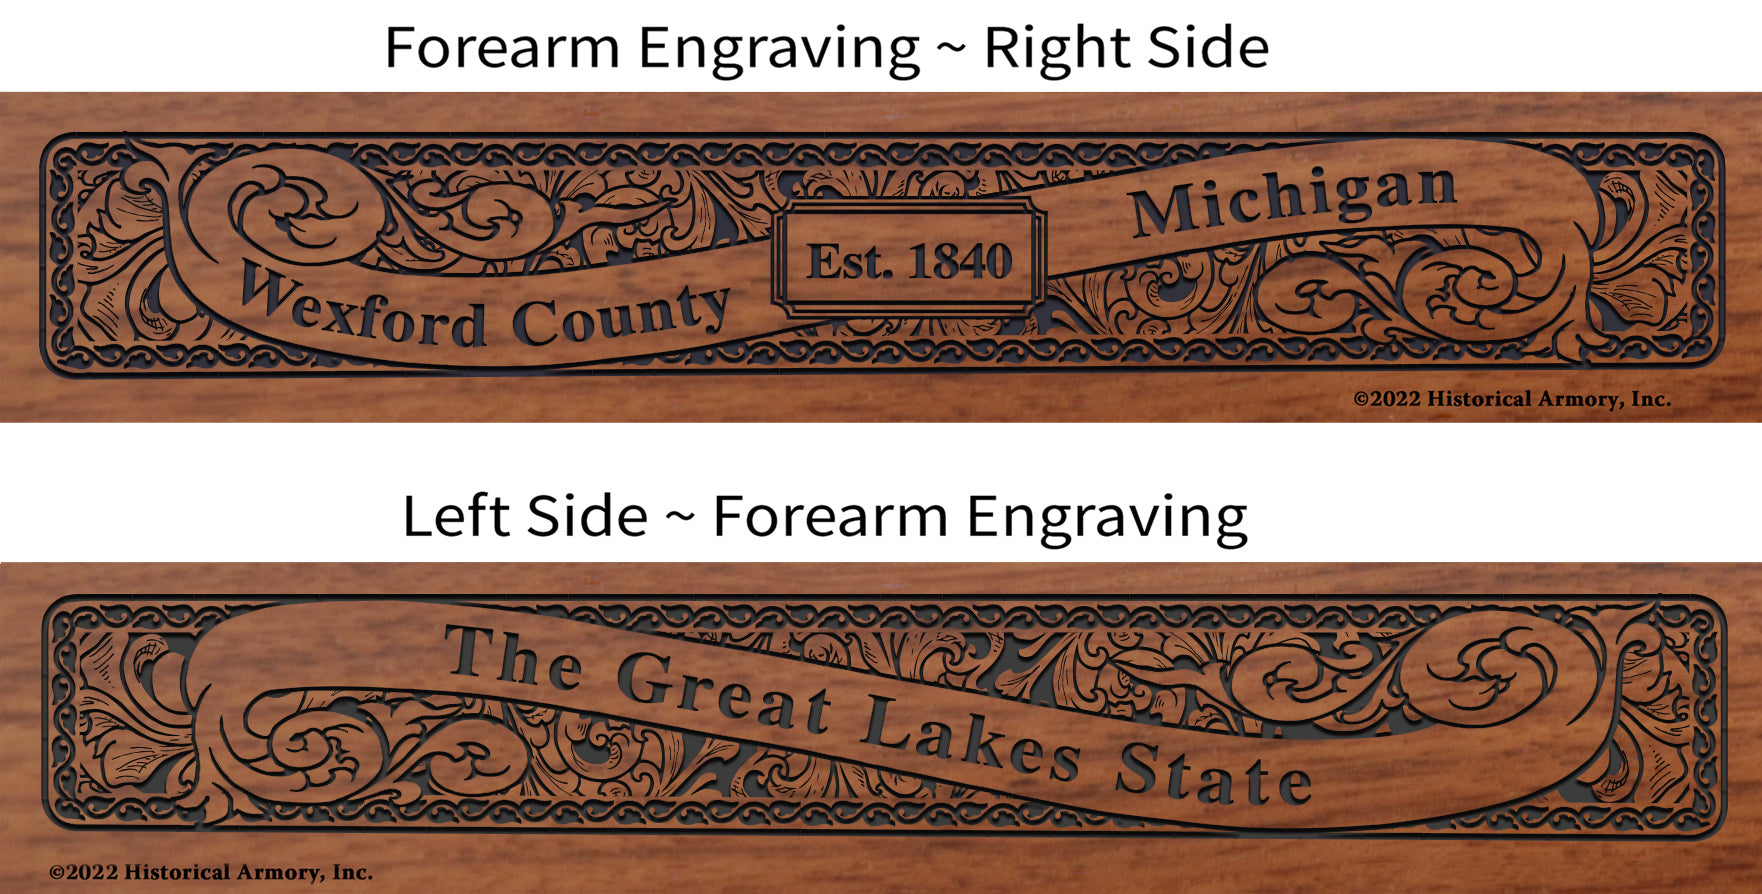 Wexford County Michigan Engraved Rifle Forearm